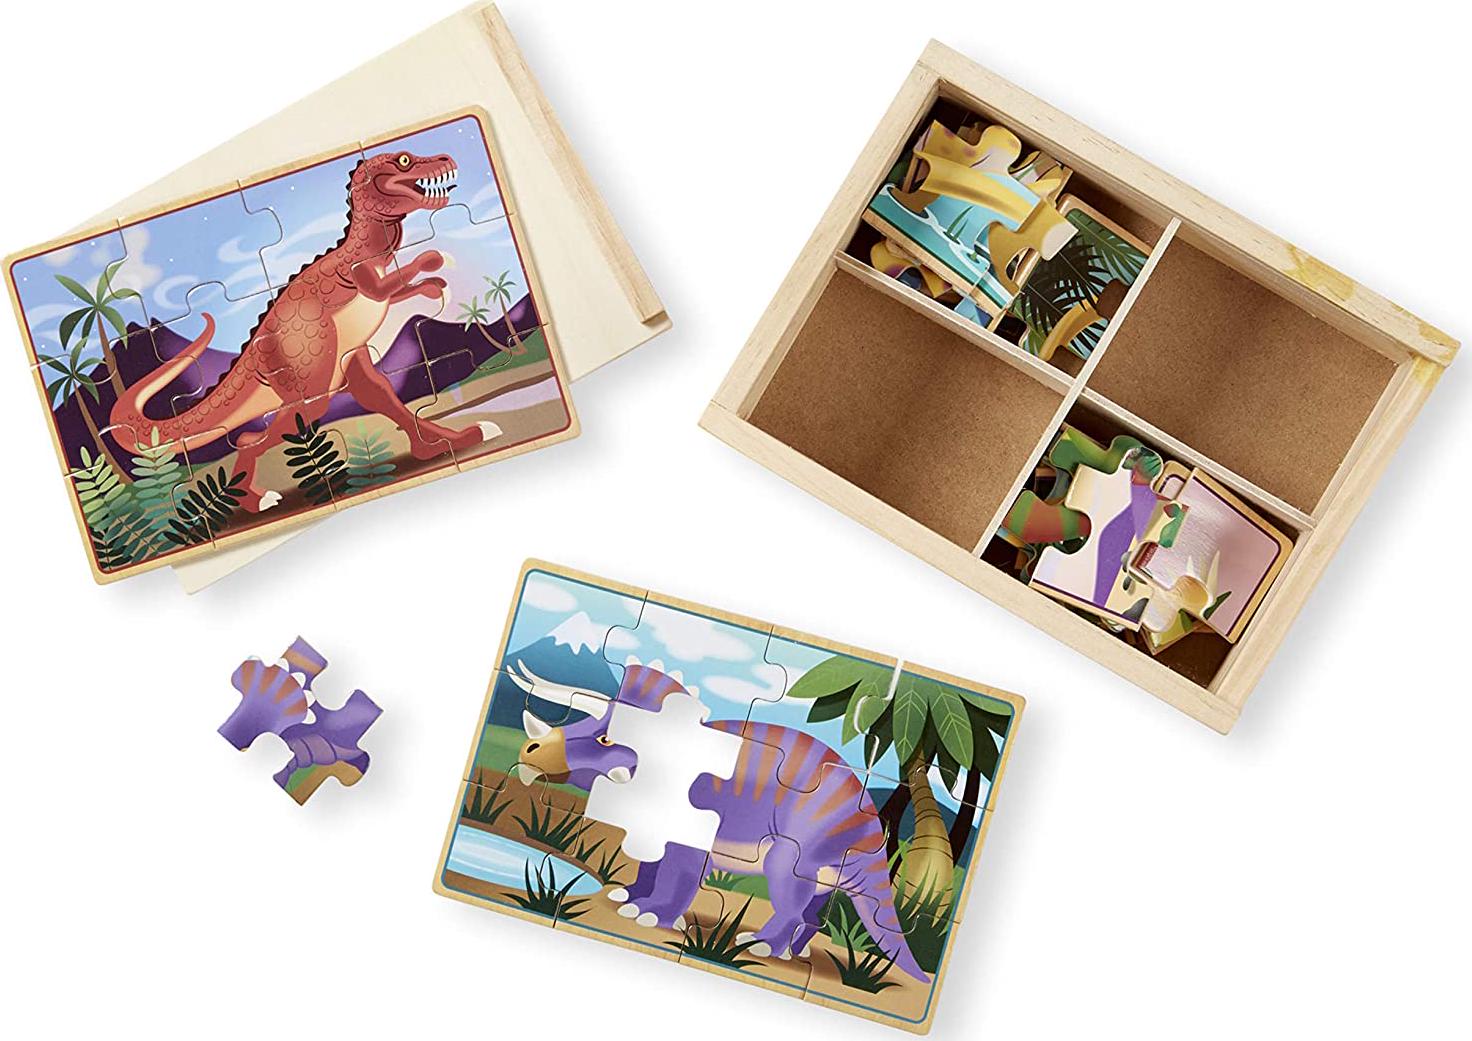 Melissa & Doug, Melissa and Doug 3791 Dinosaurs 4-in-1 Wooden Jigsaw Puzzles in a Storage Box (48 pcs)